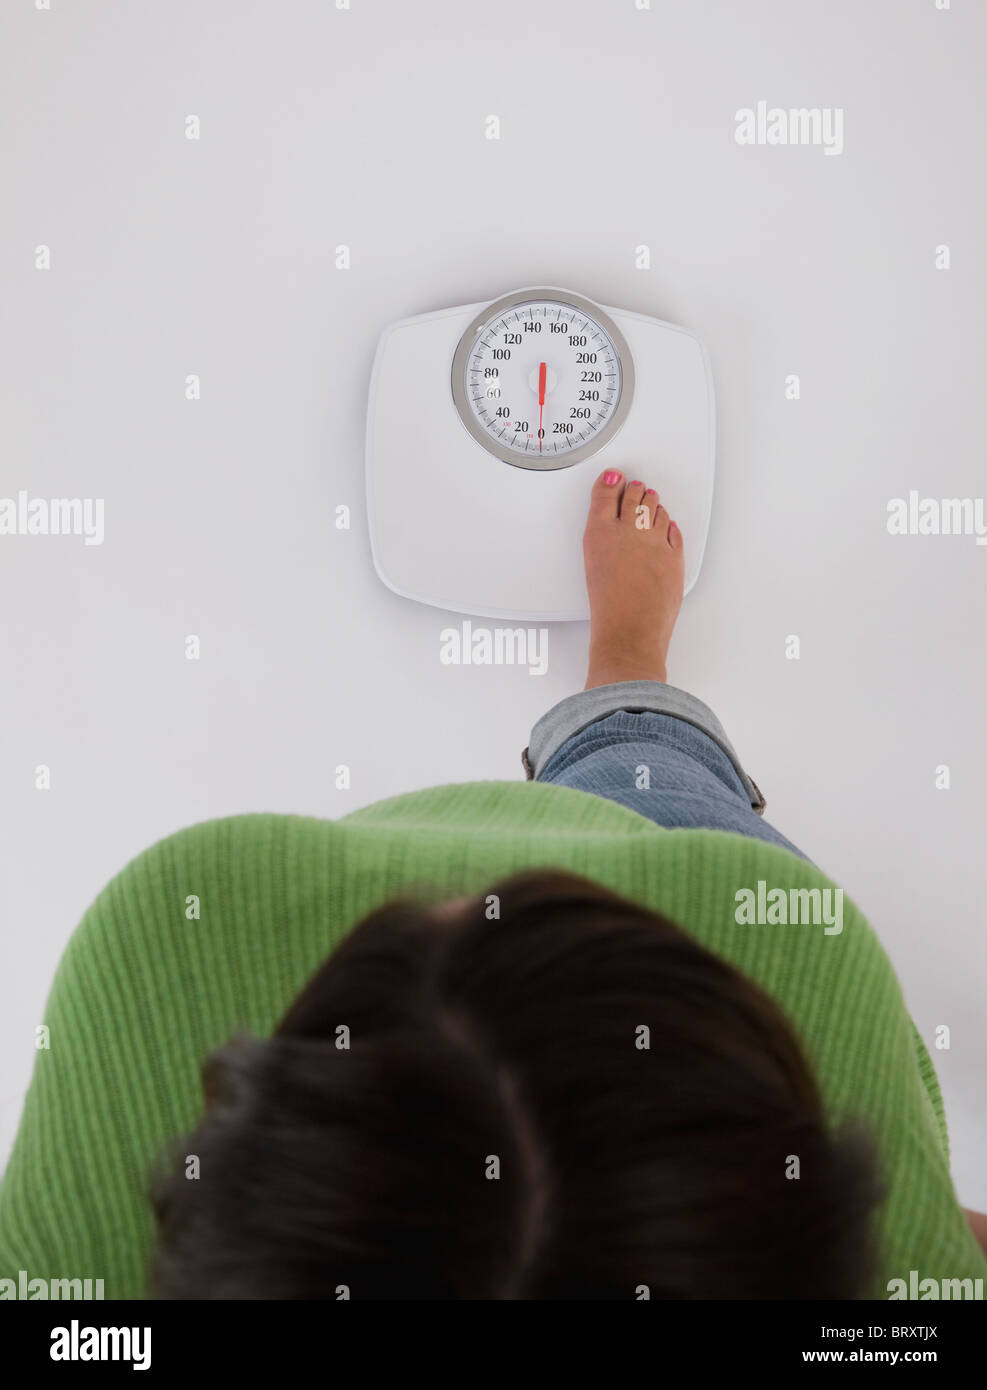 https://c8.alamy.com/comp/BRXTJX/woman-standing-on-weight-scales-view-from-above-BRXTJX.jpg